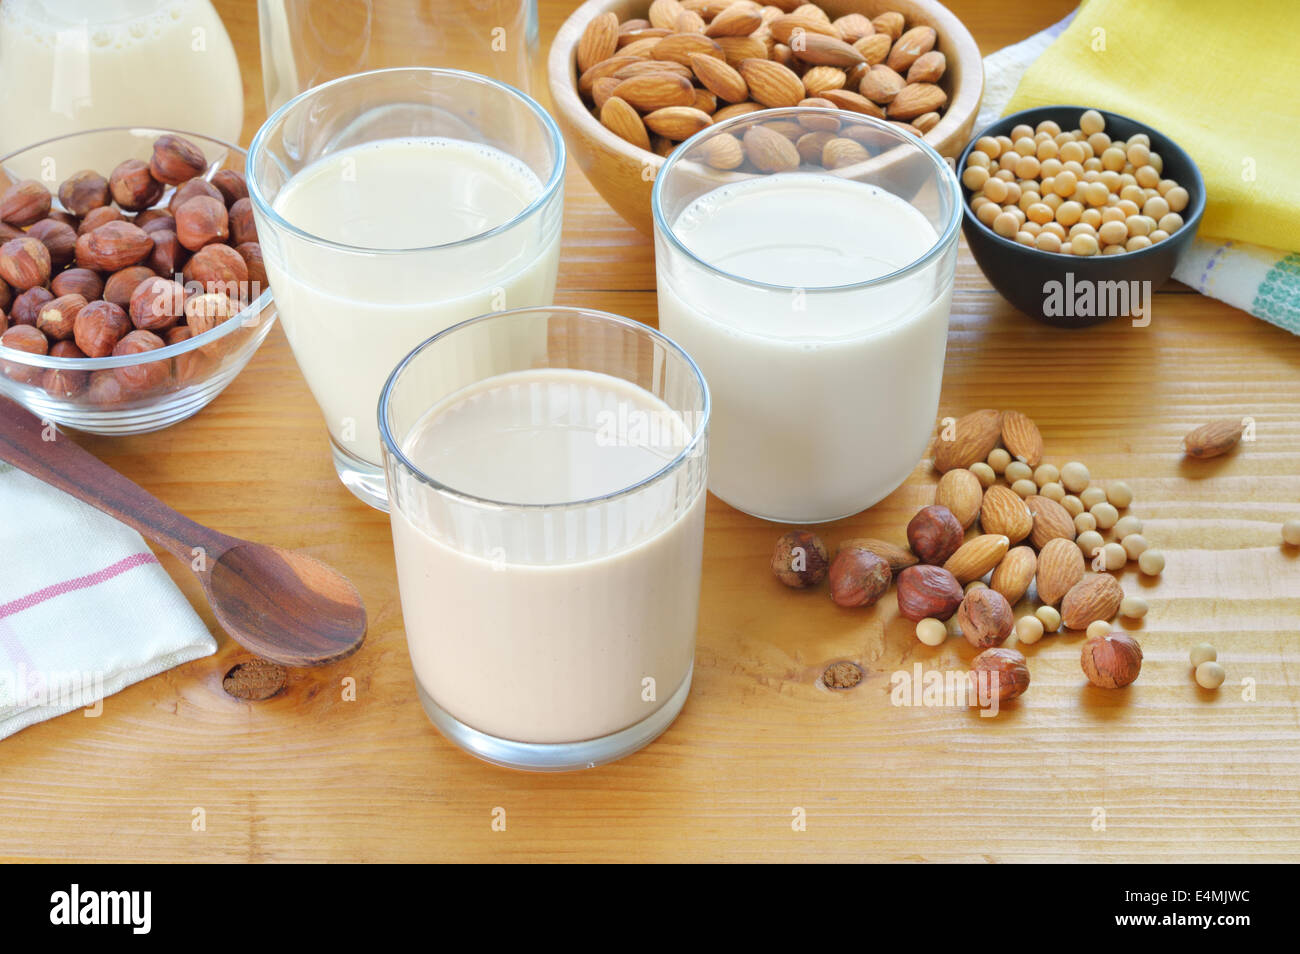 Different vegan milks on a table. Hazelnut, rice, soya and almond milk. Substitute for dairy milk. Stock Photo